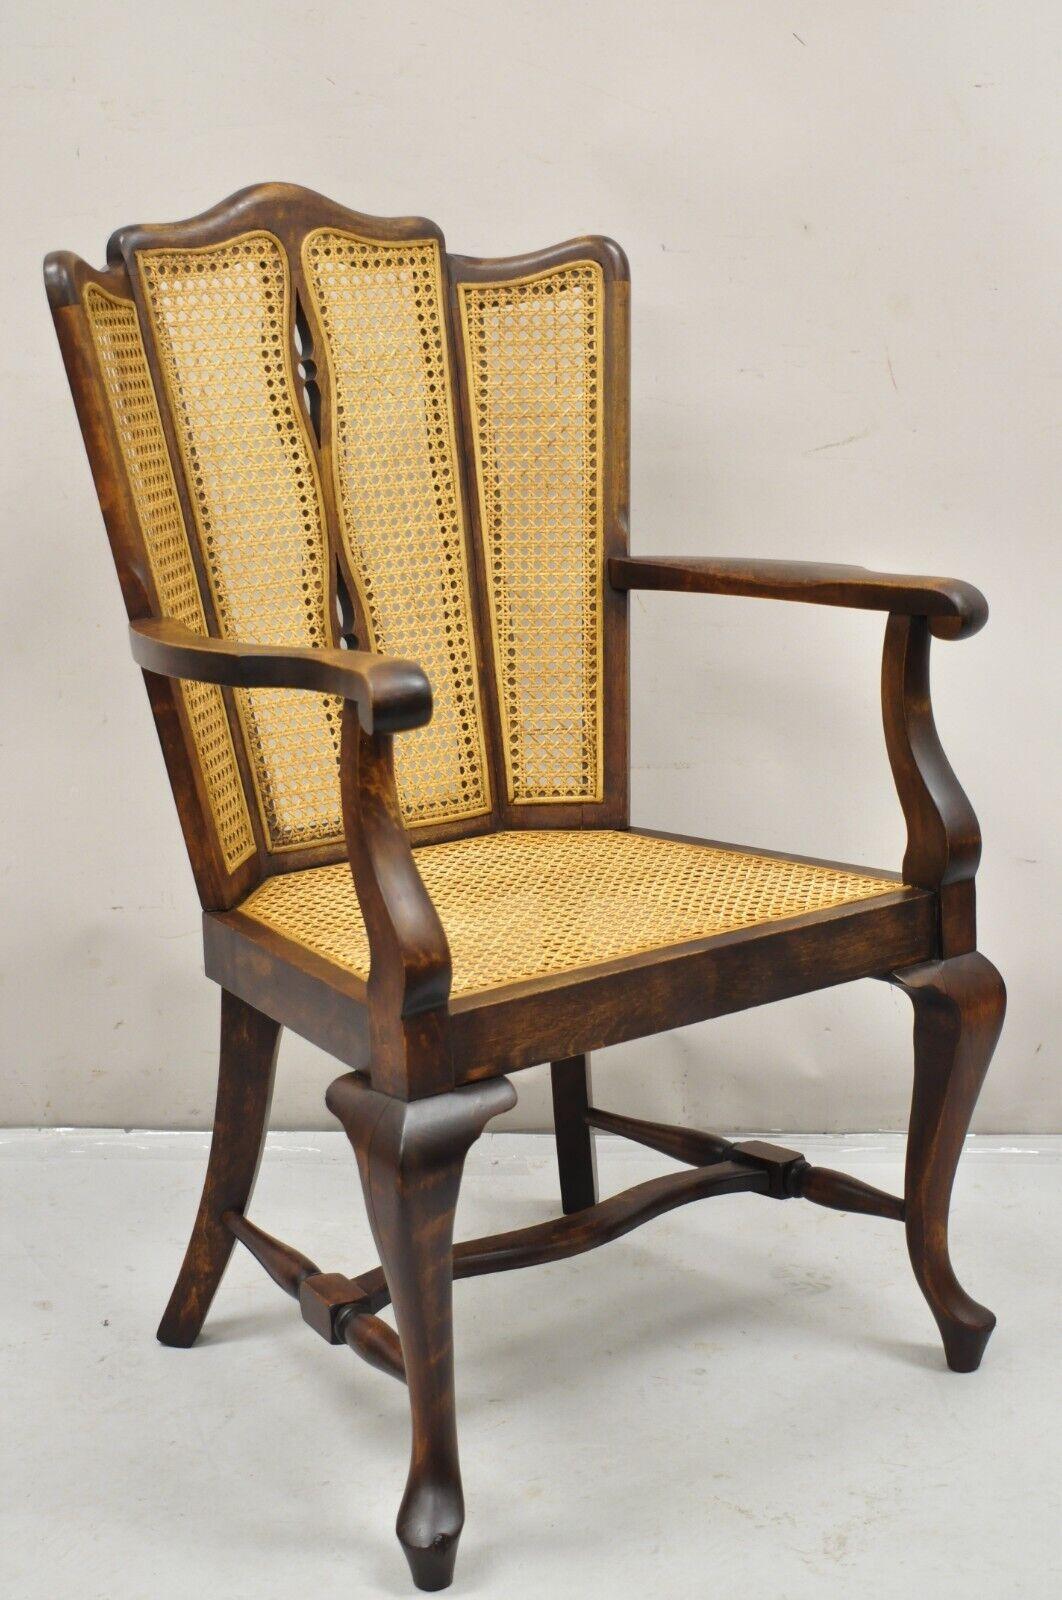 Antique Victorian Walnut and Cane Carved Lounge Arm Chair With Queen Anne Legs. Circa Early 1900s. Measurements: 38.5